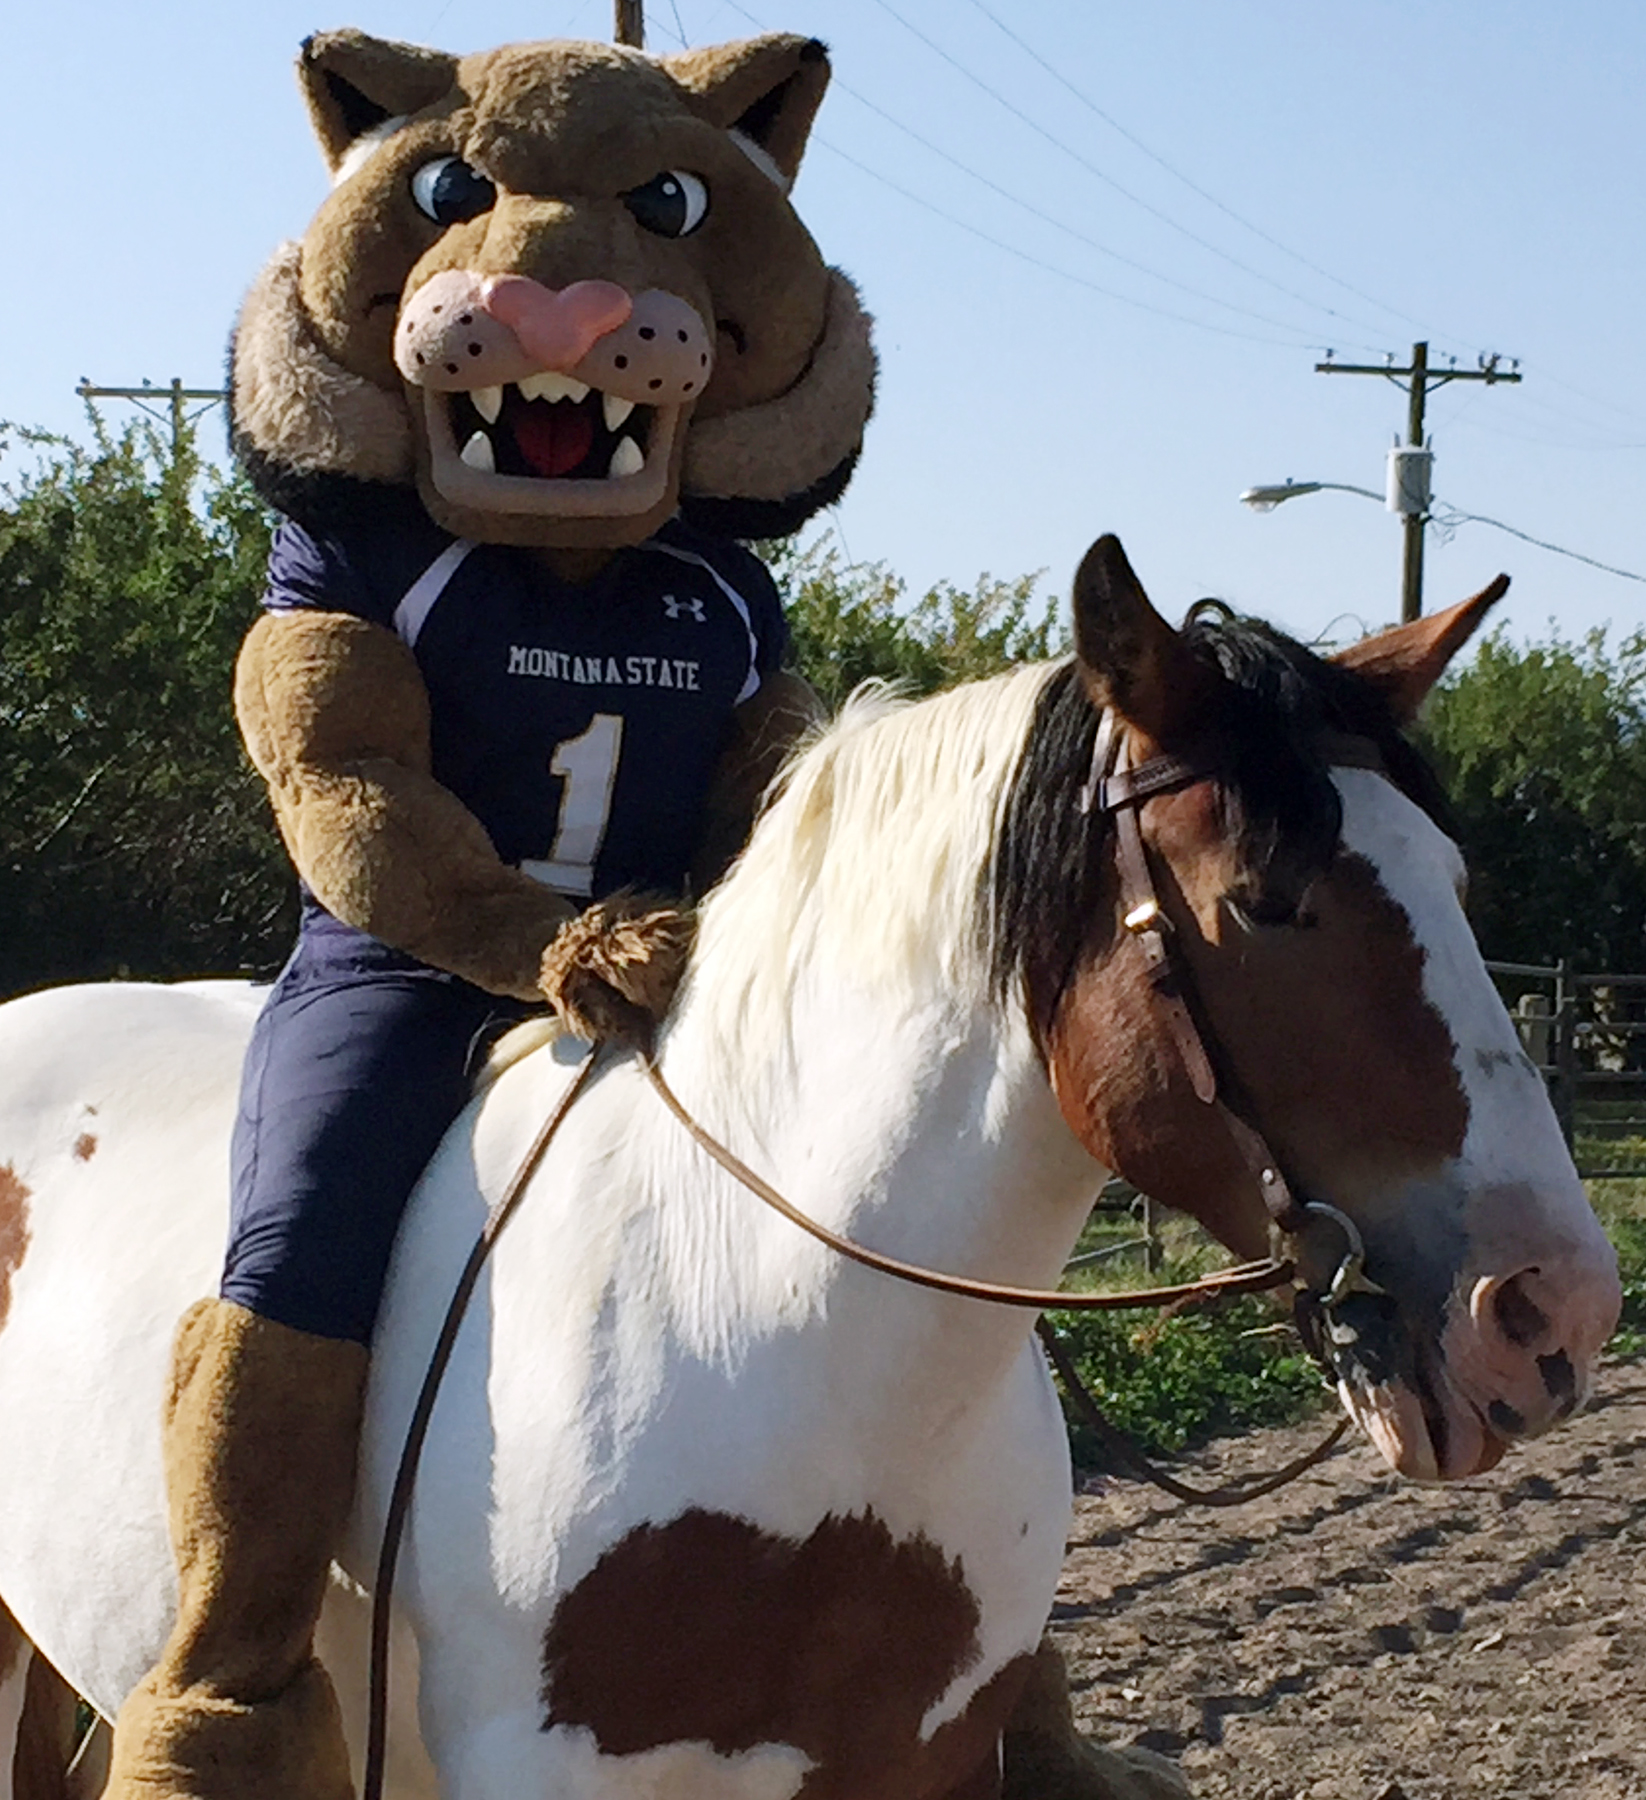 MSU mascot Champ riding a horse in the outdoor arena at BART farm.